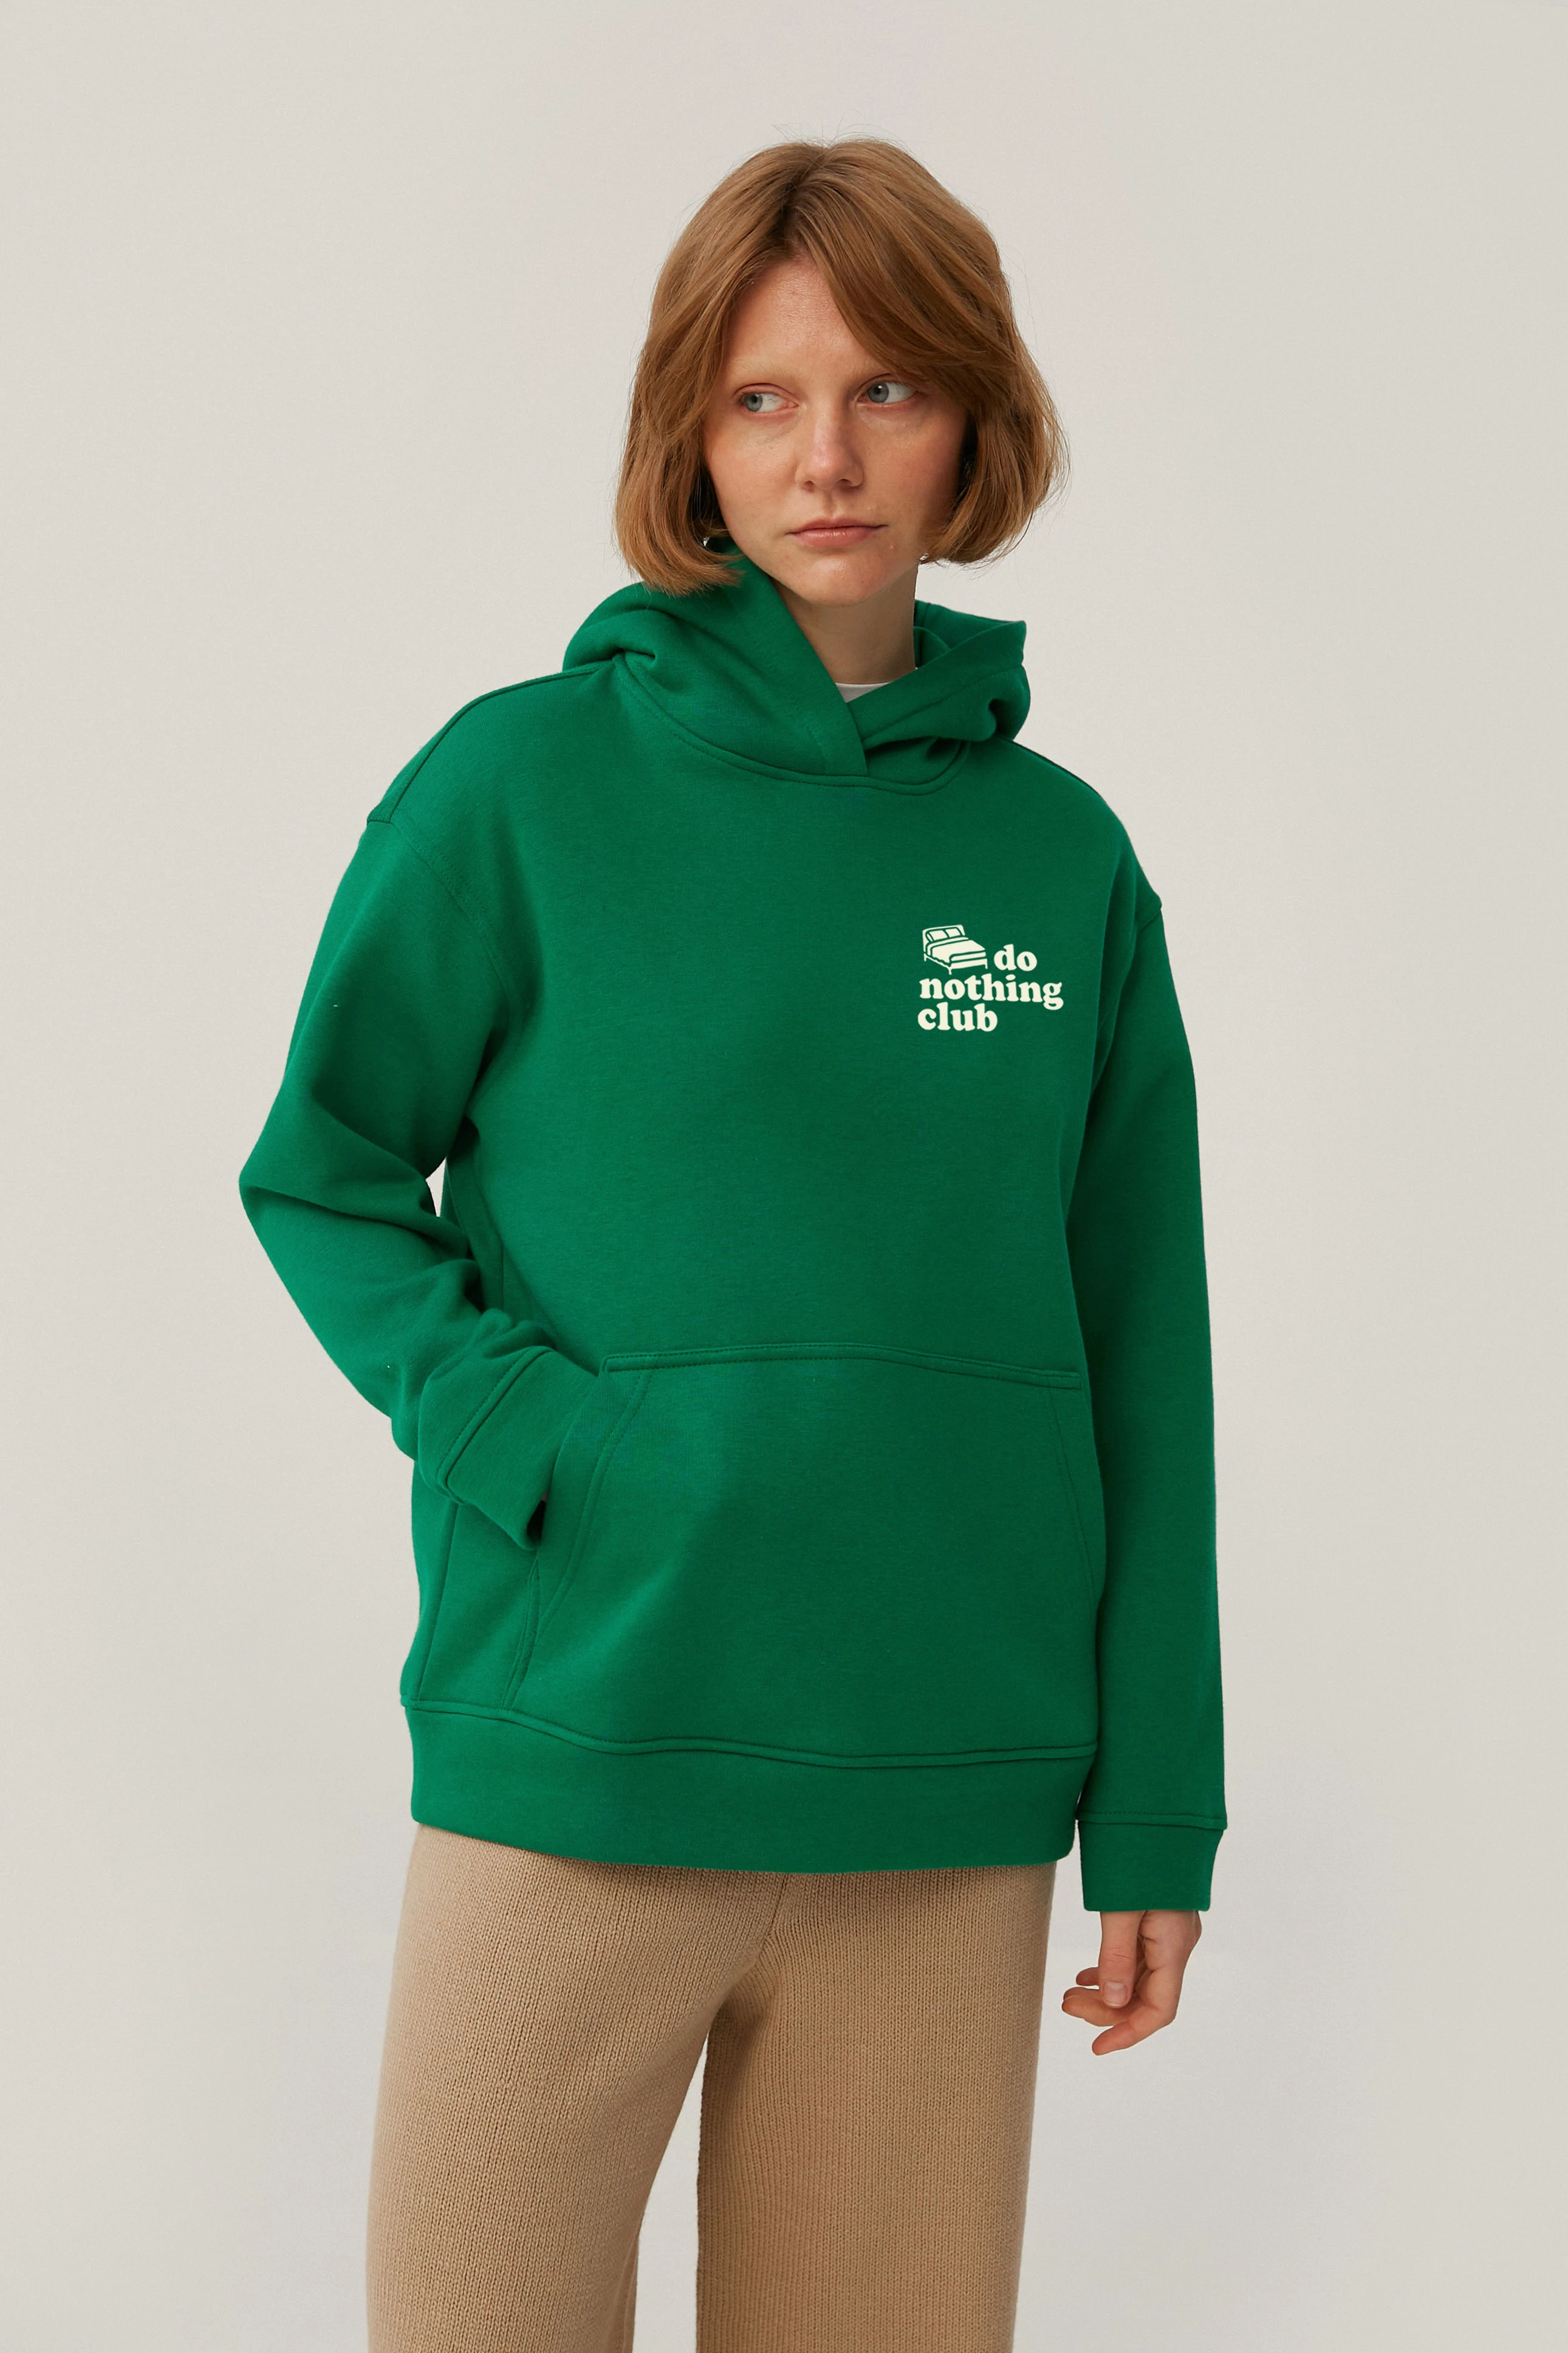 Green jersey hoodie "Do nothing club" with fleece, photo 2